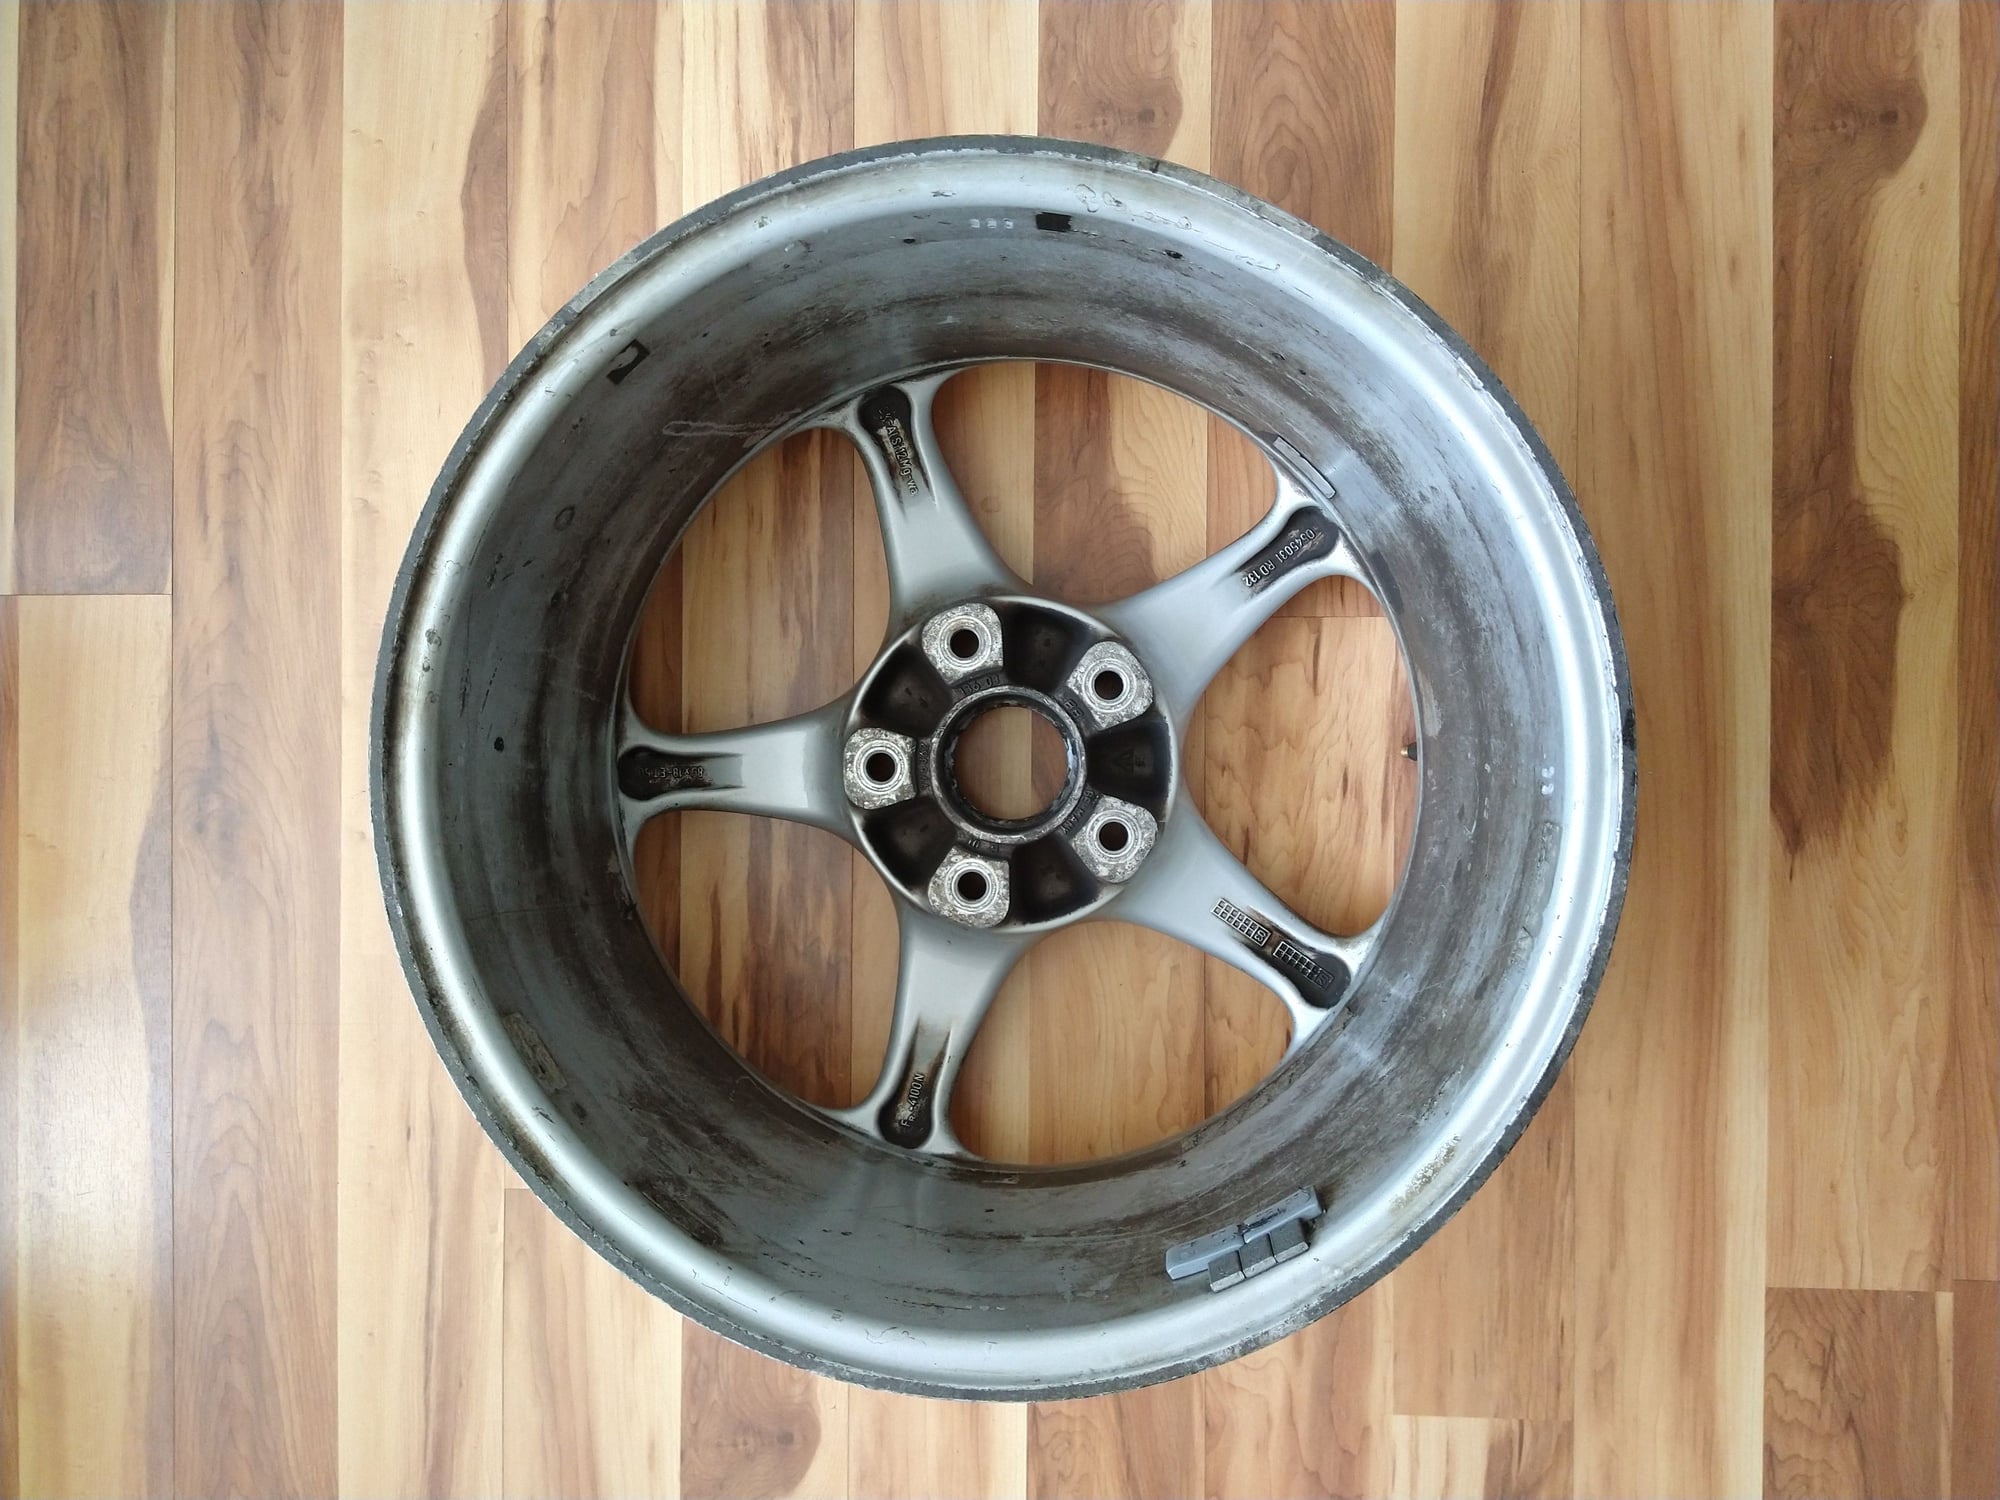 Wheels and Tires/Axles - 2002 996 911 BBS wheels 18x8.5 & 18x10 - Used - 2002 to 2006 Porsche 911 - Denver, CO 80203, United States